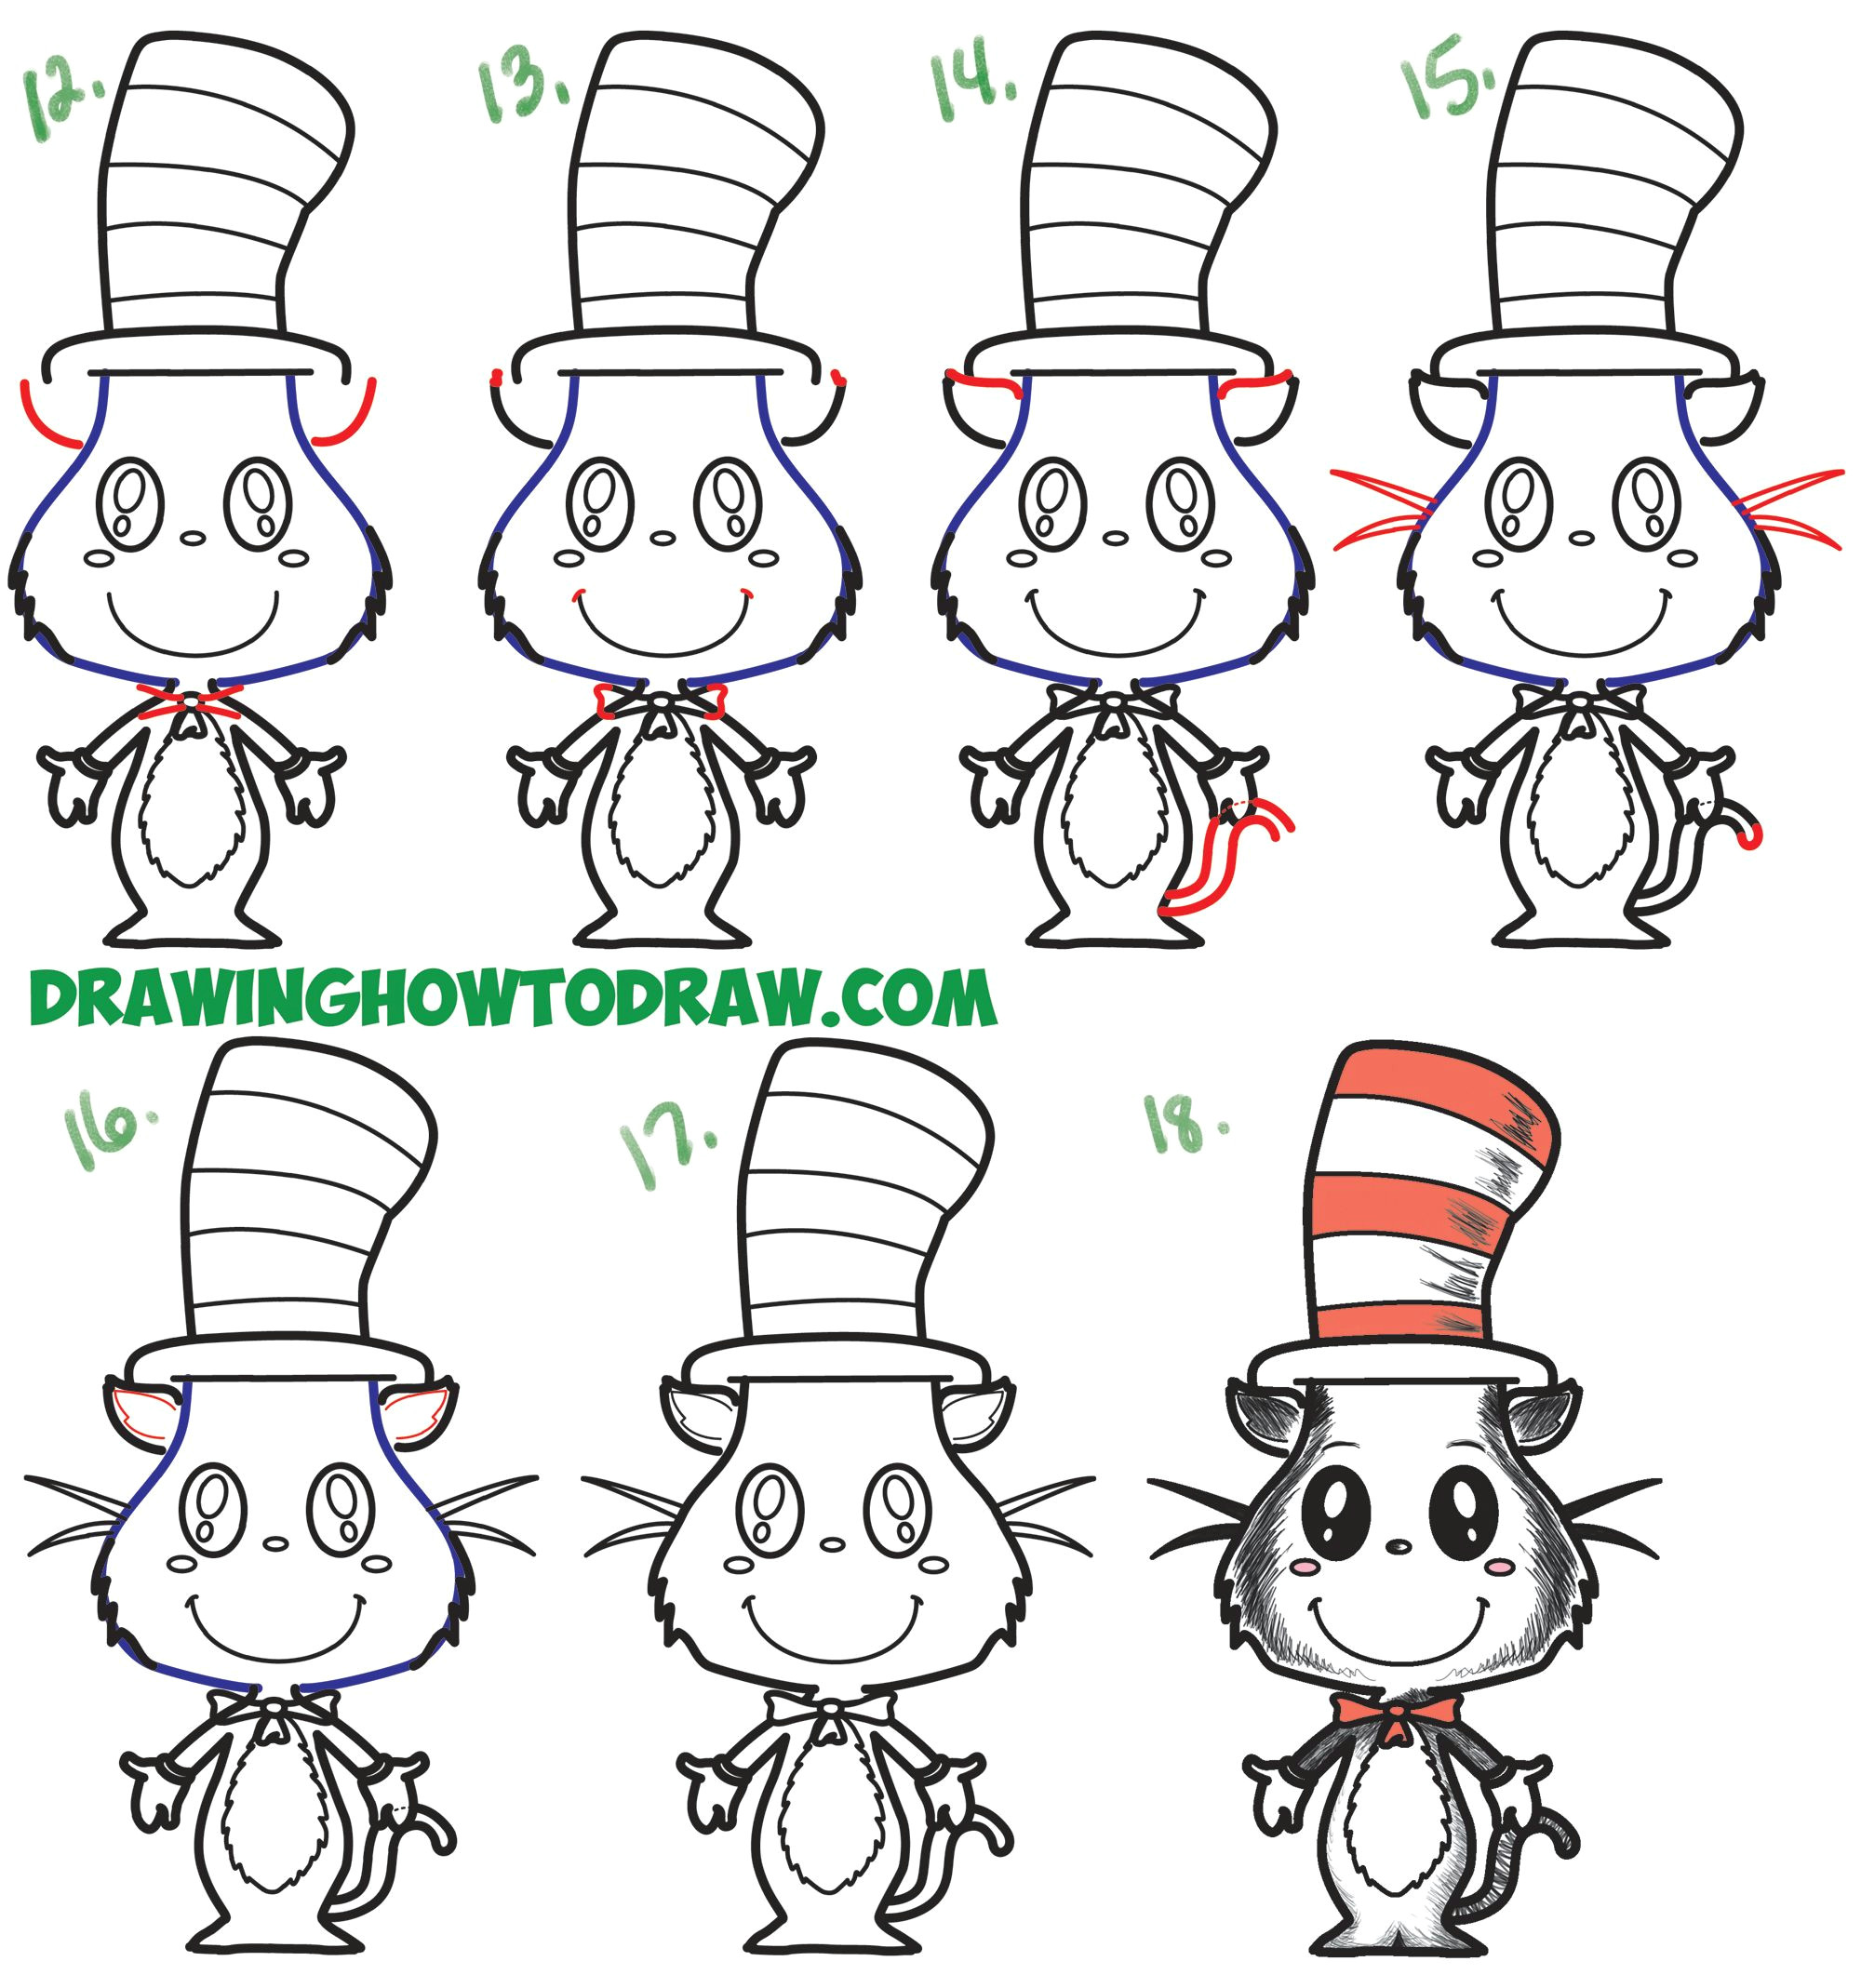 Children S Drawing Of A Cat How to Draw the Cat In the Hat Cute Kawaii Chibi Version Easy